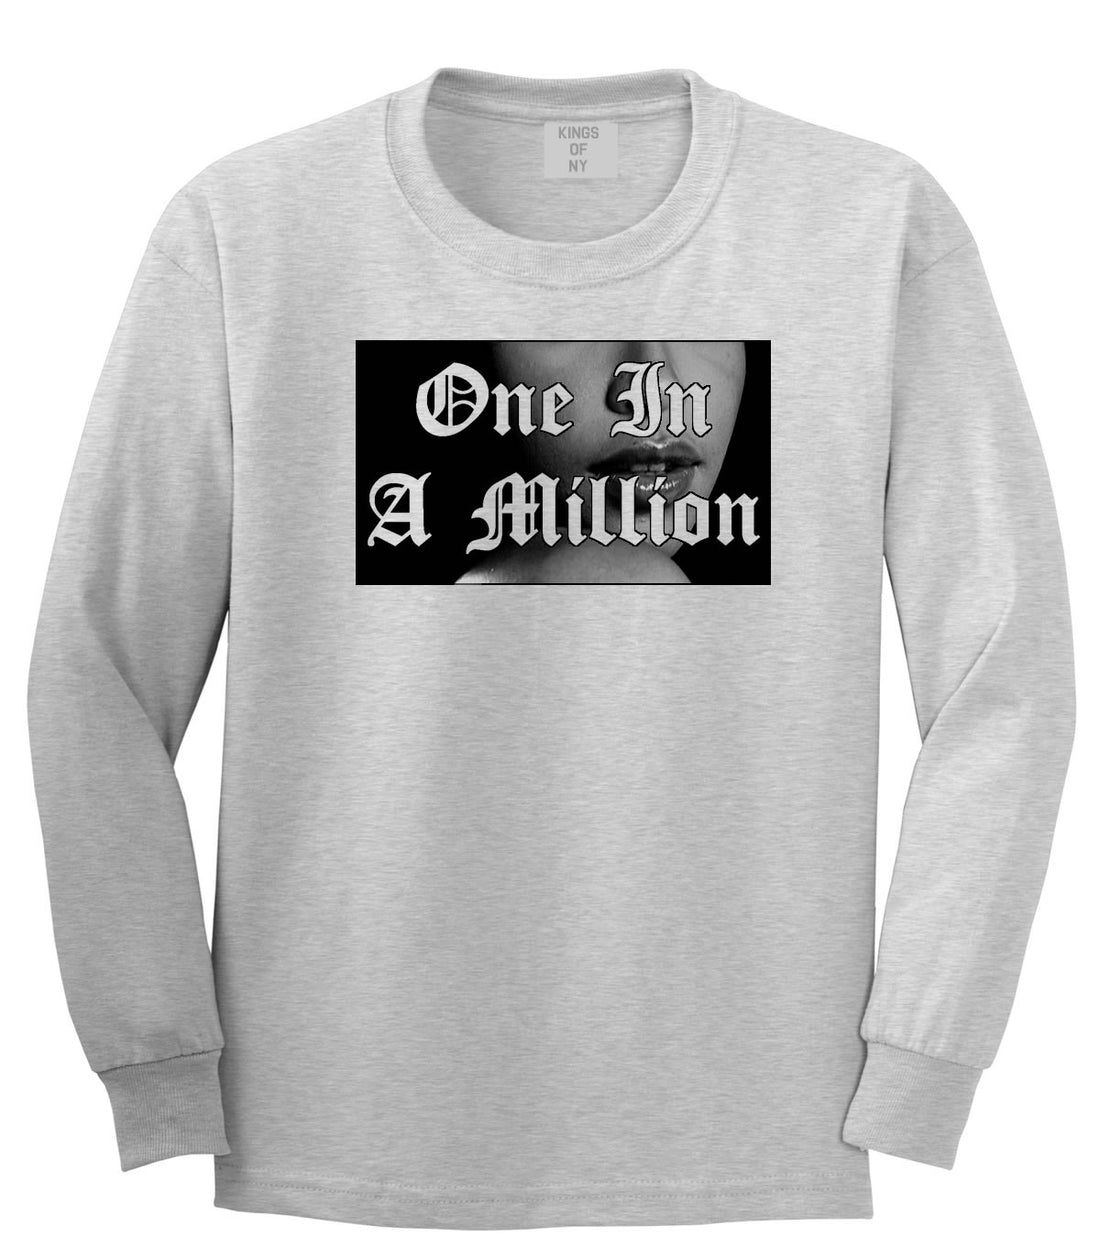 One in a Million Aaliyah Long Sleeve T-Shirt By Kings Of NY